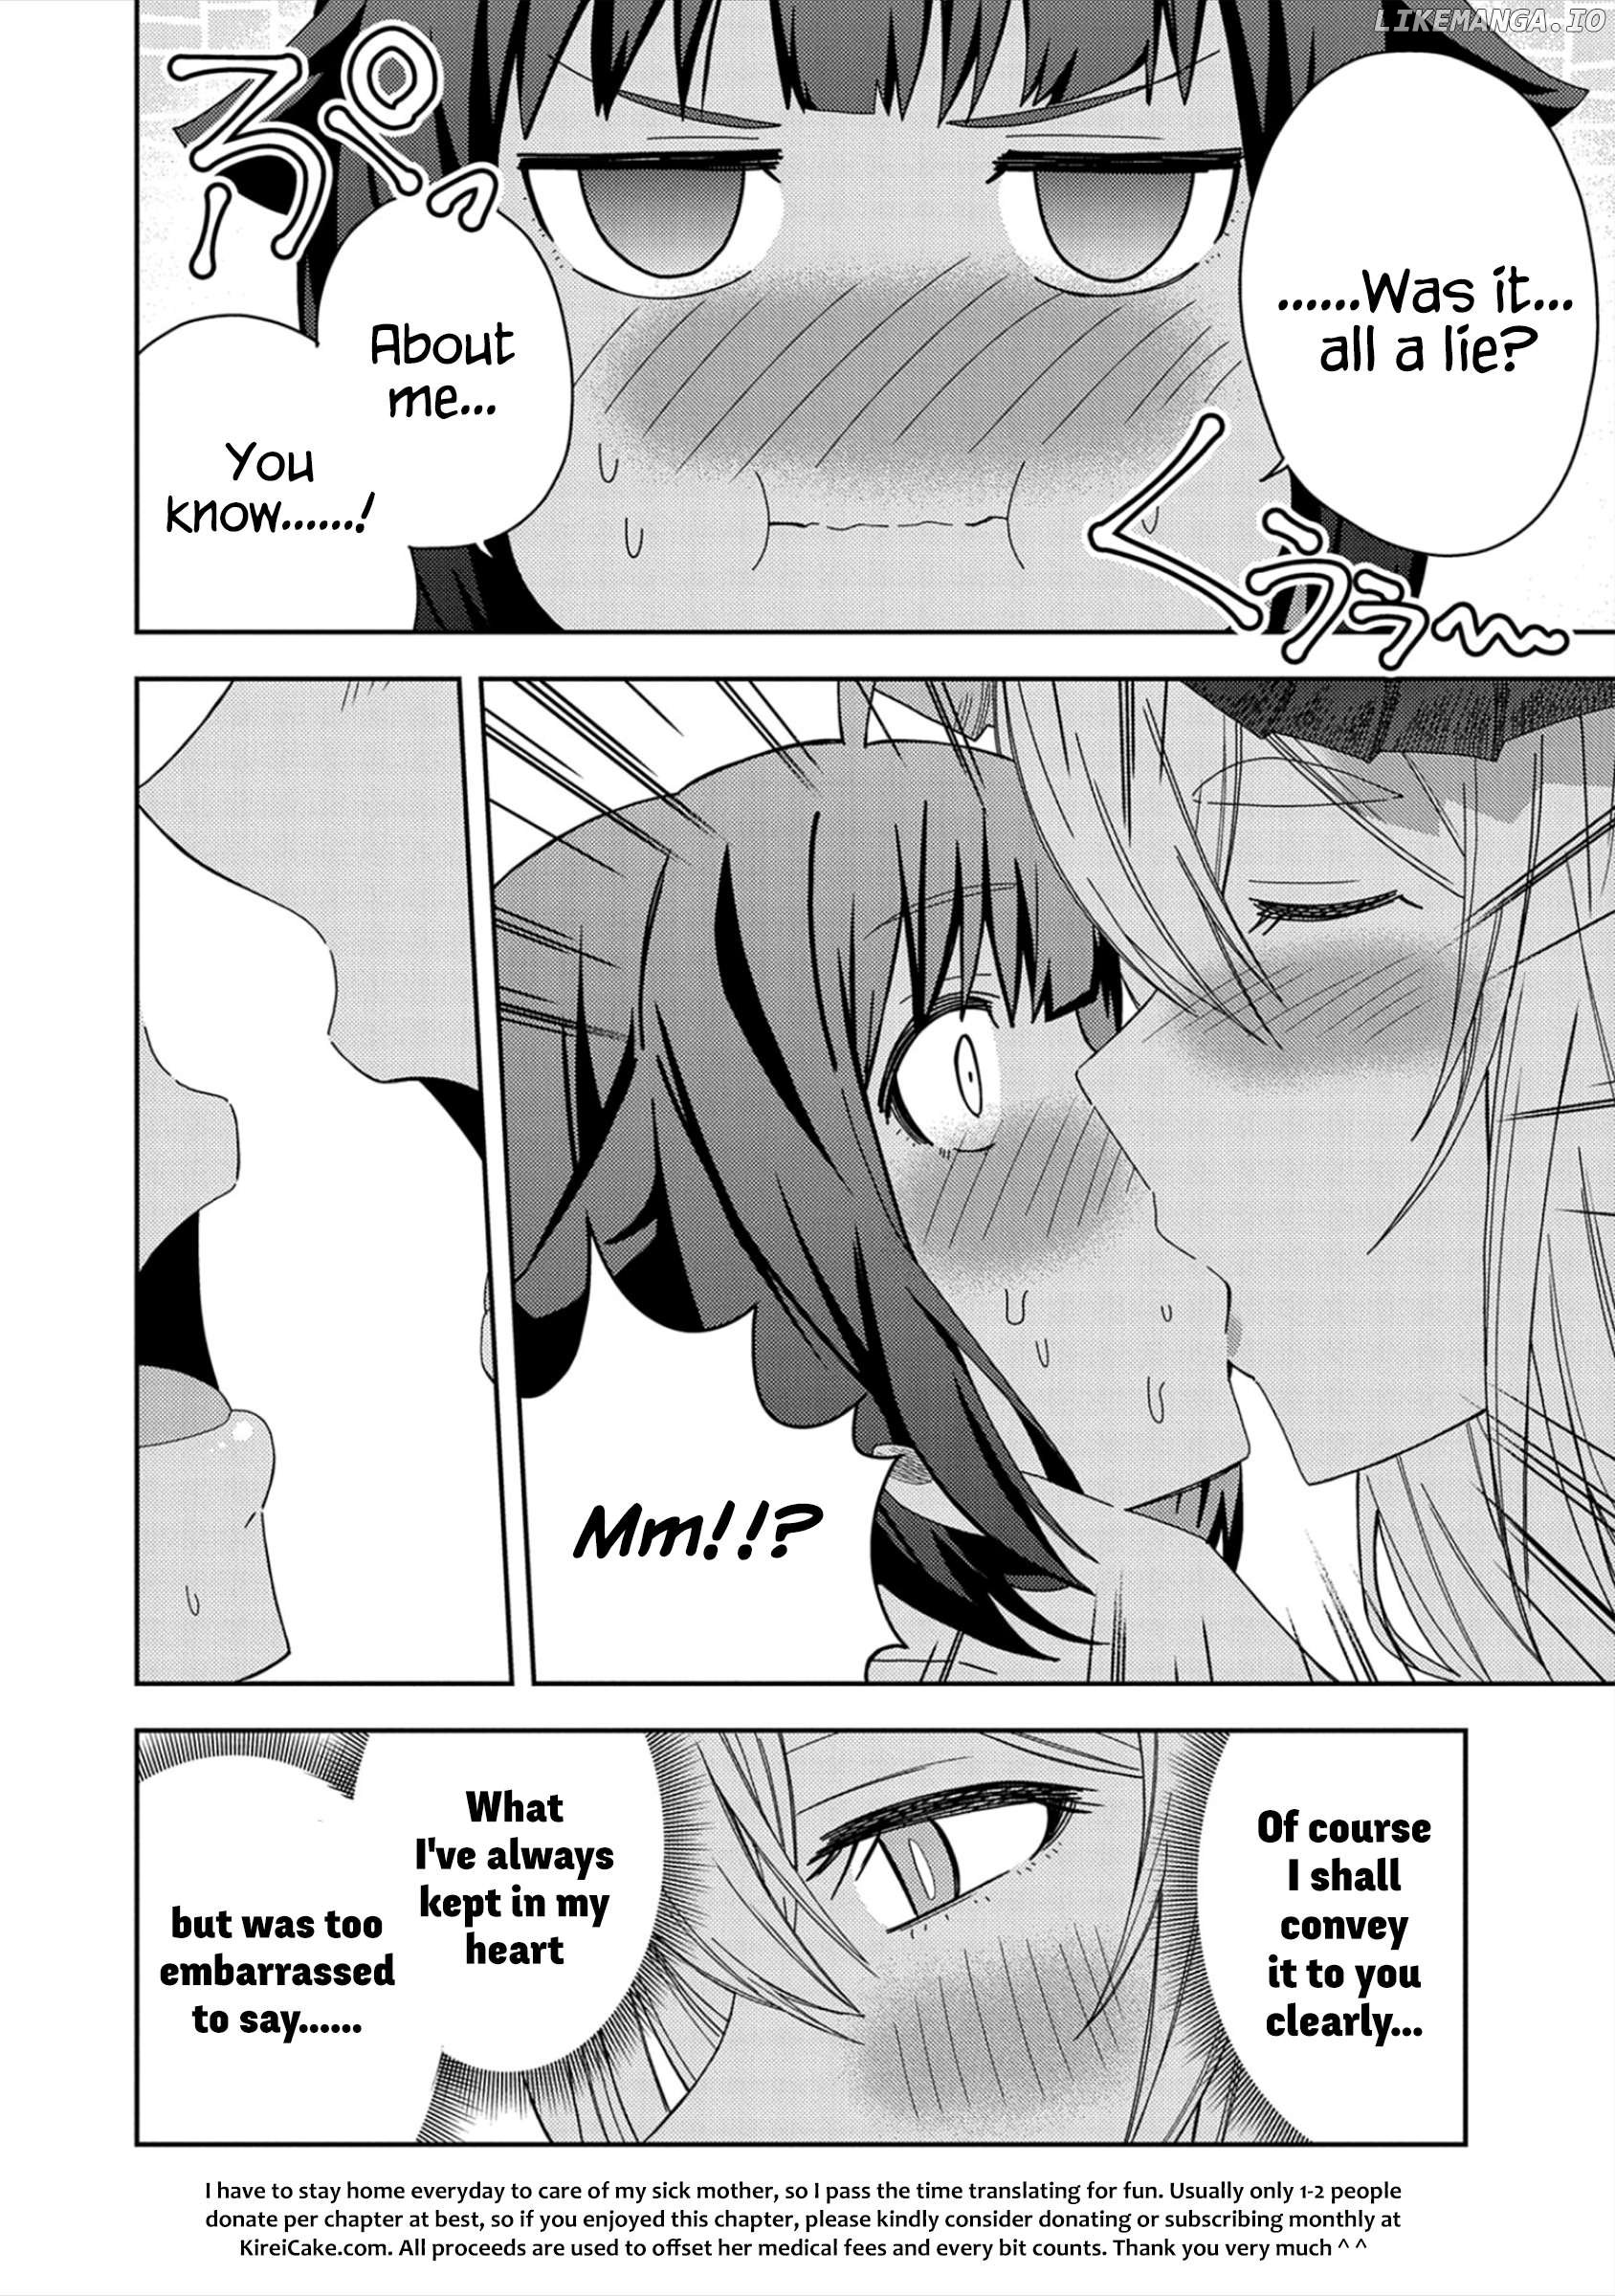 I Summoned The Devil To Grant Me a Wish, But I Married Her Instead Since She Was Adorable ~My New Devil Wife~ Chapter 31 - page 30